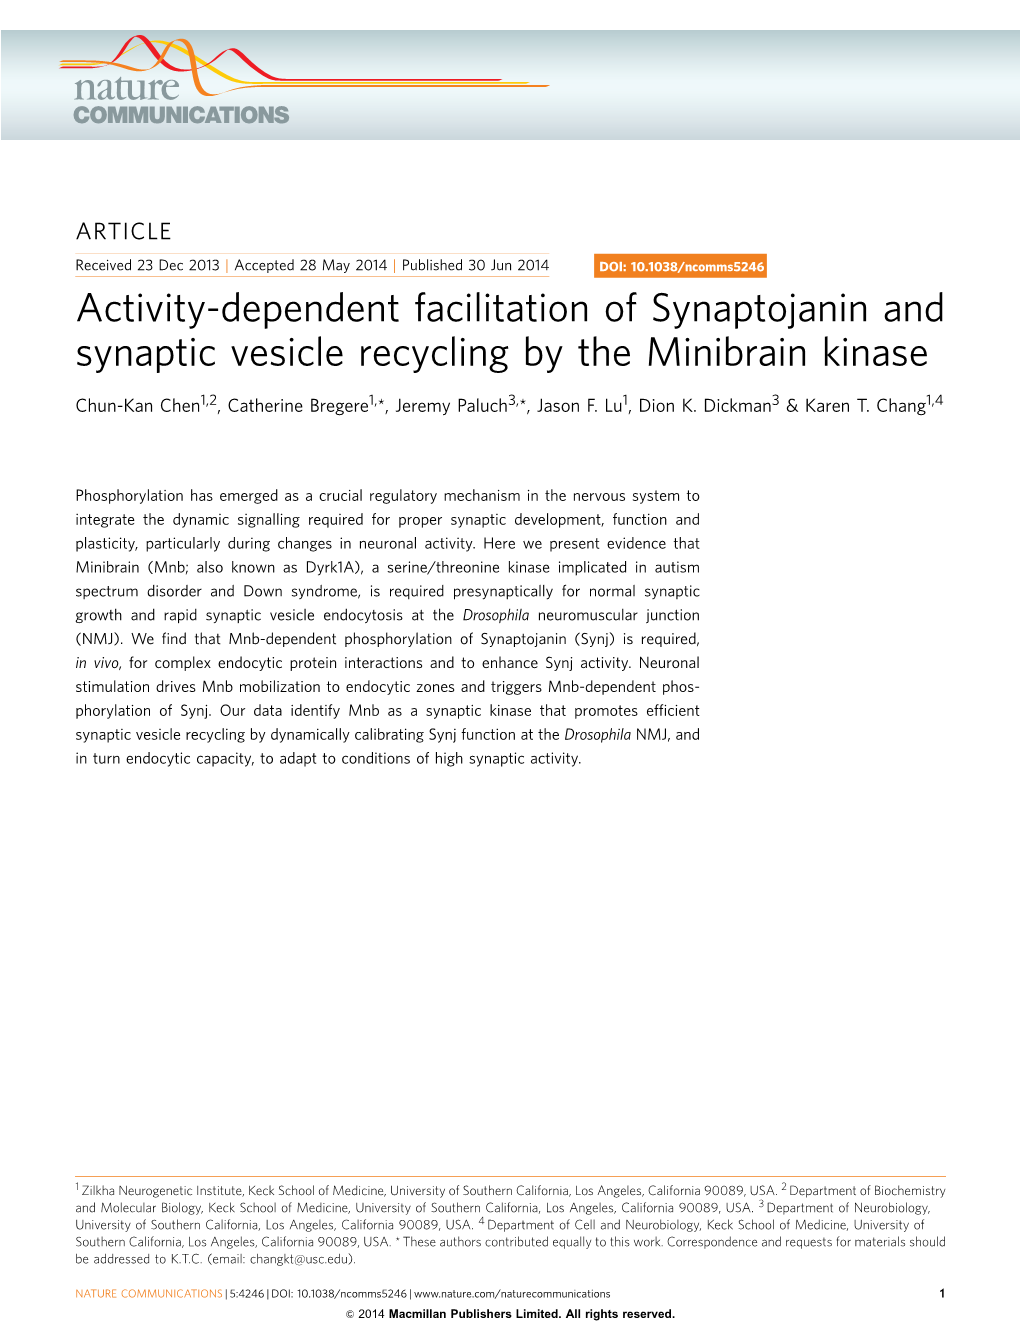 Activity-Dependent Facilitation of Synaptojanin and Synaptic Vesicle Recycling by the Minibrain Kinase